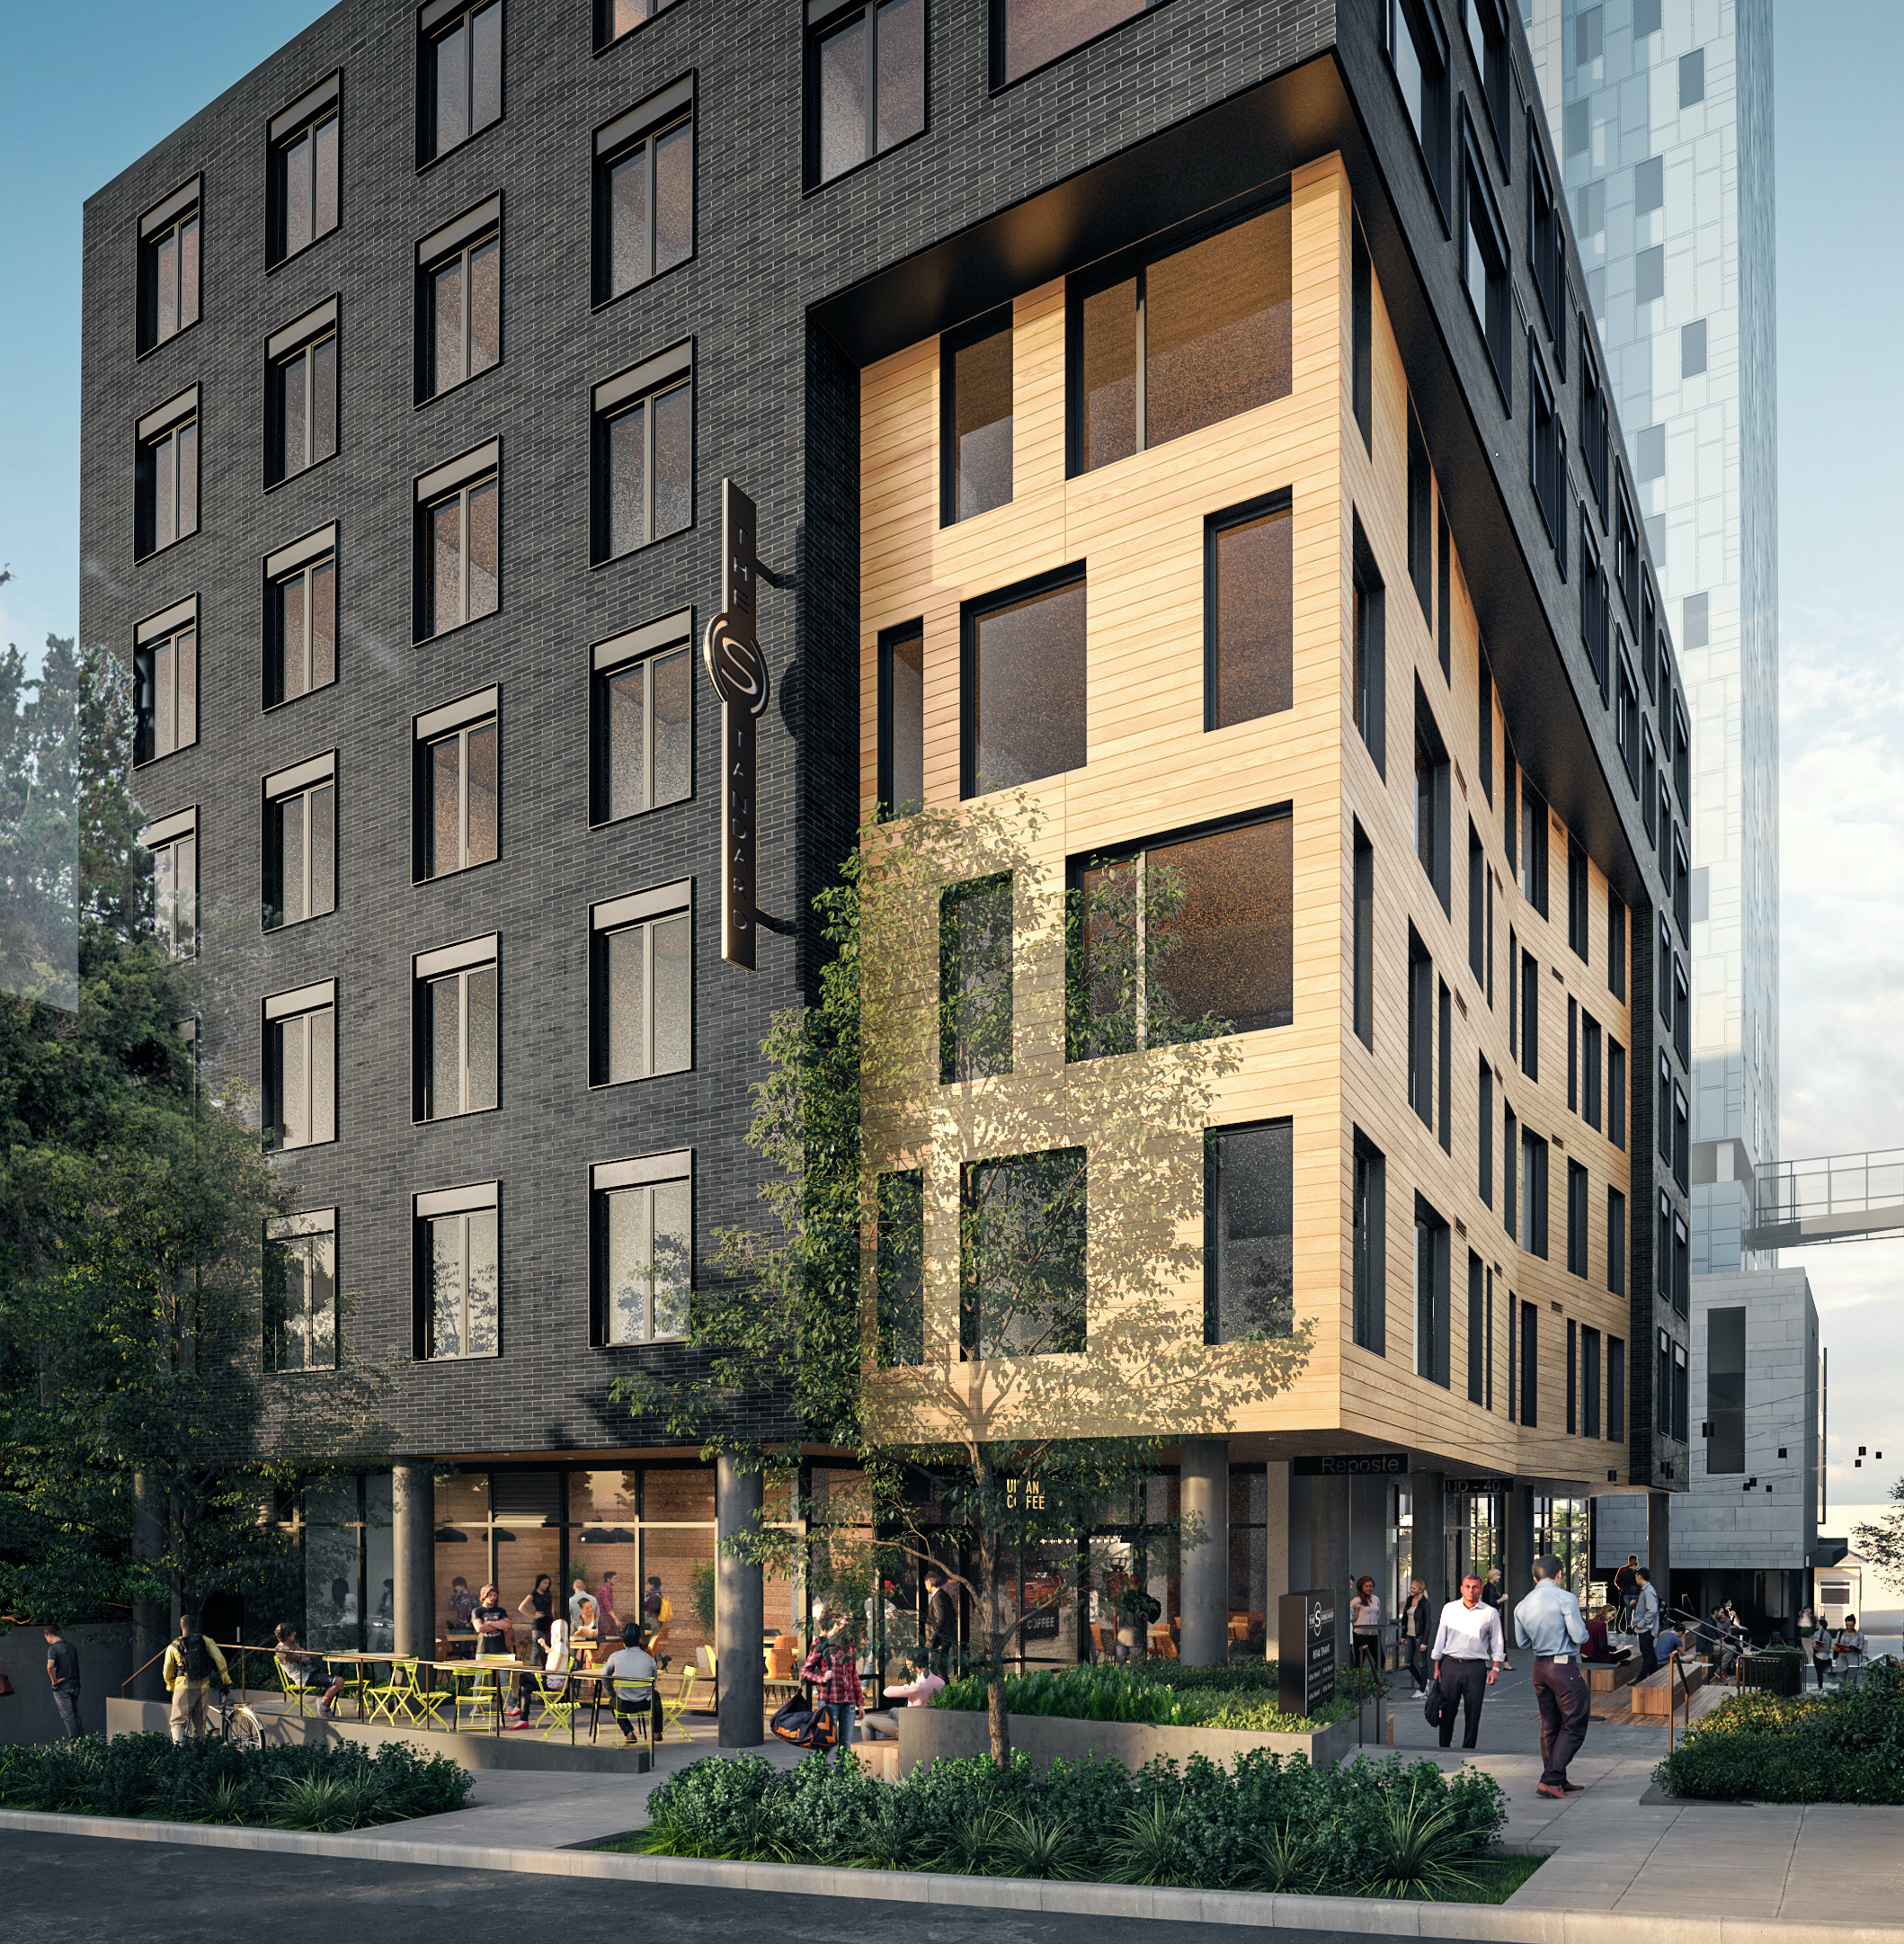 Mass Timber: The Standard at Seattle